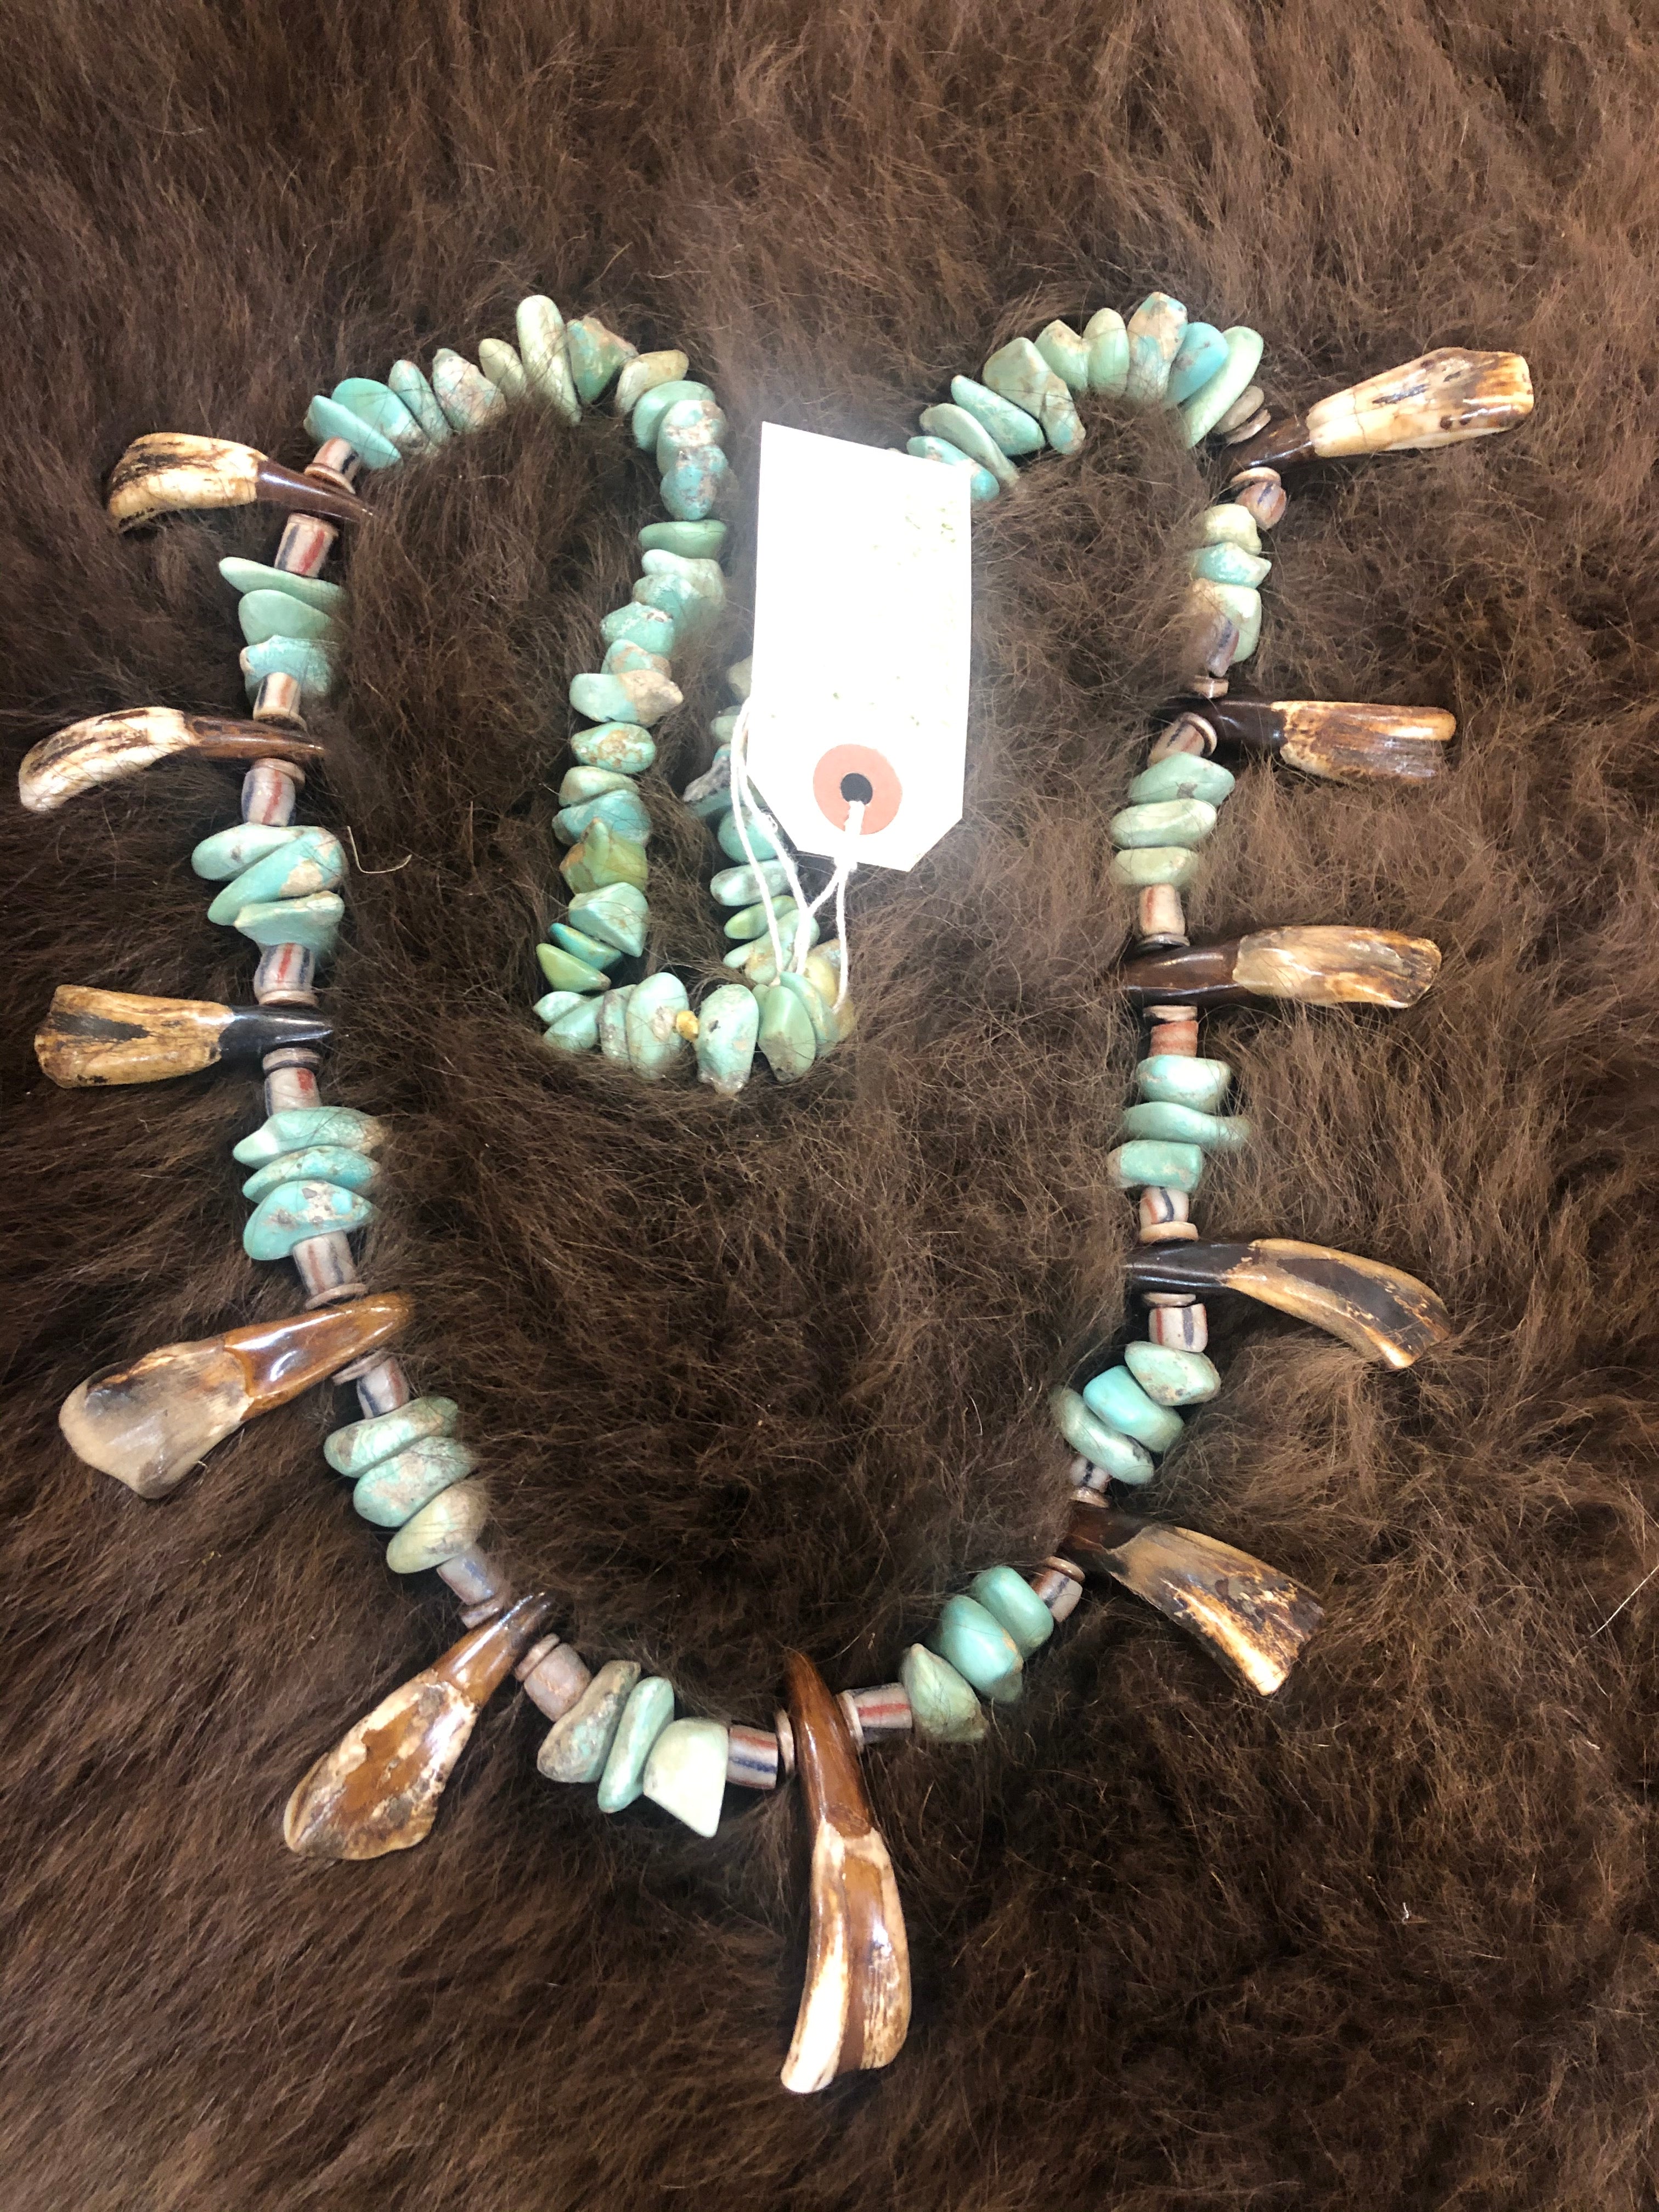 Wild Man (or Woman) Turquoise, trade bead, wampum bead and buffalo tooth necklace